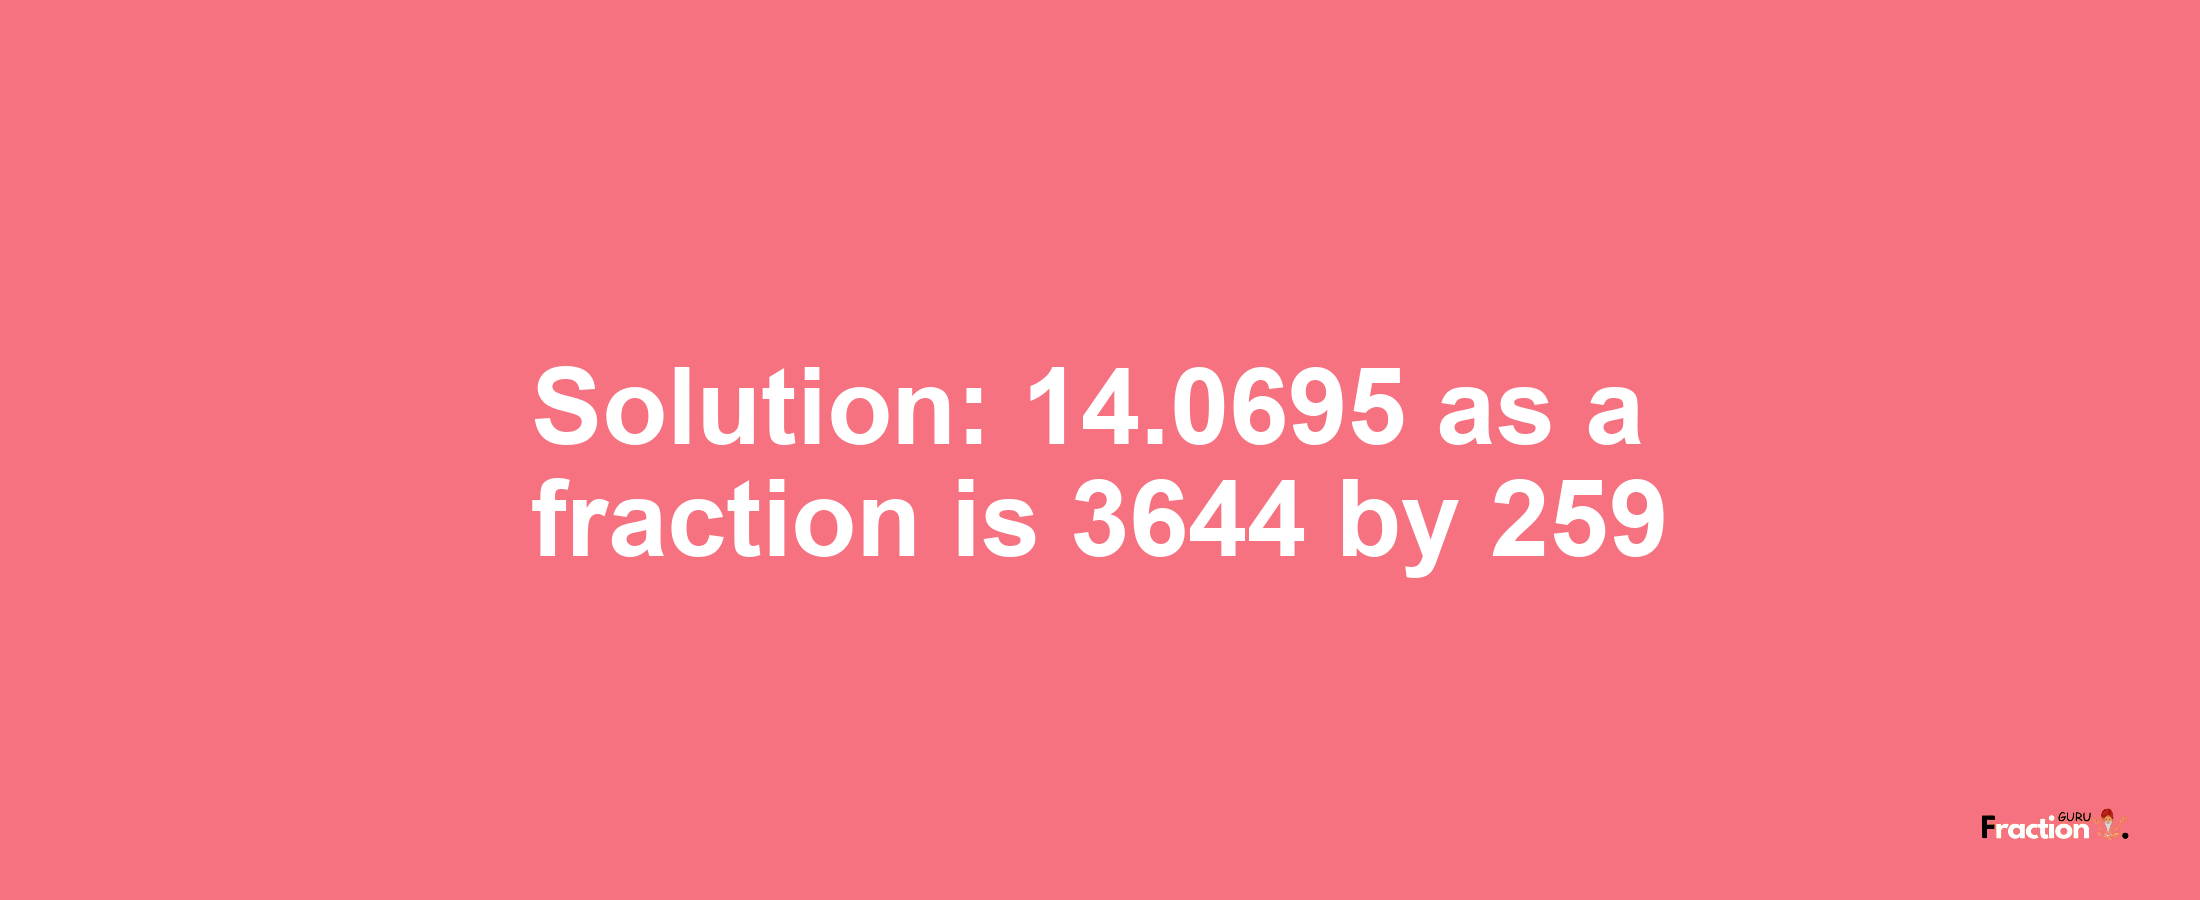 Solution:14.0695 as a fraction is 3644/259